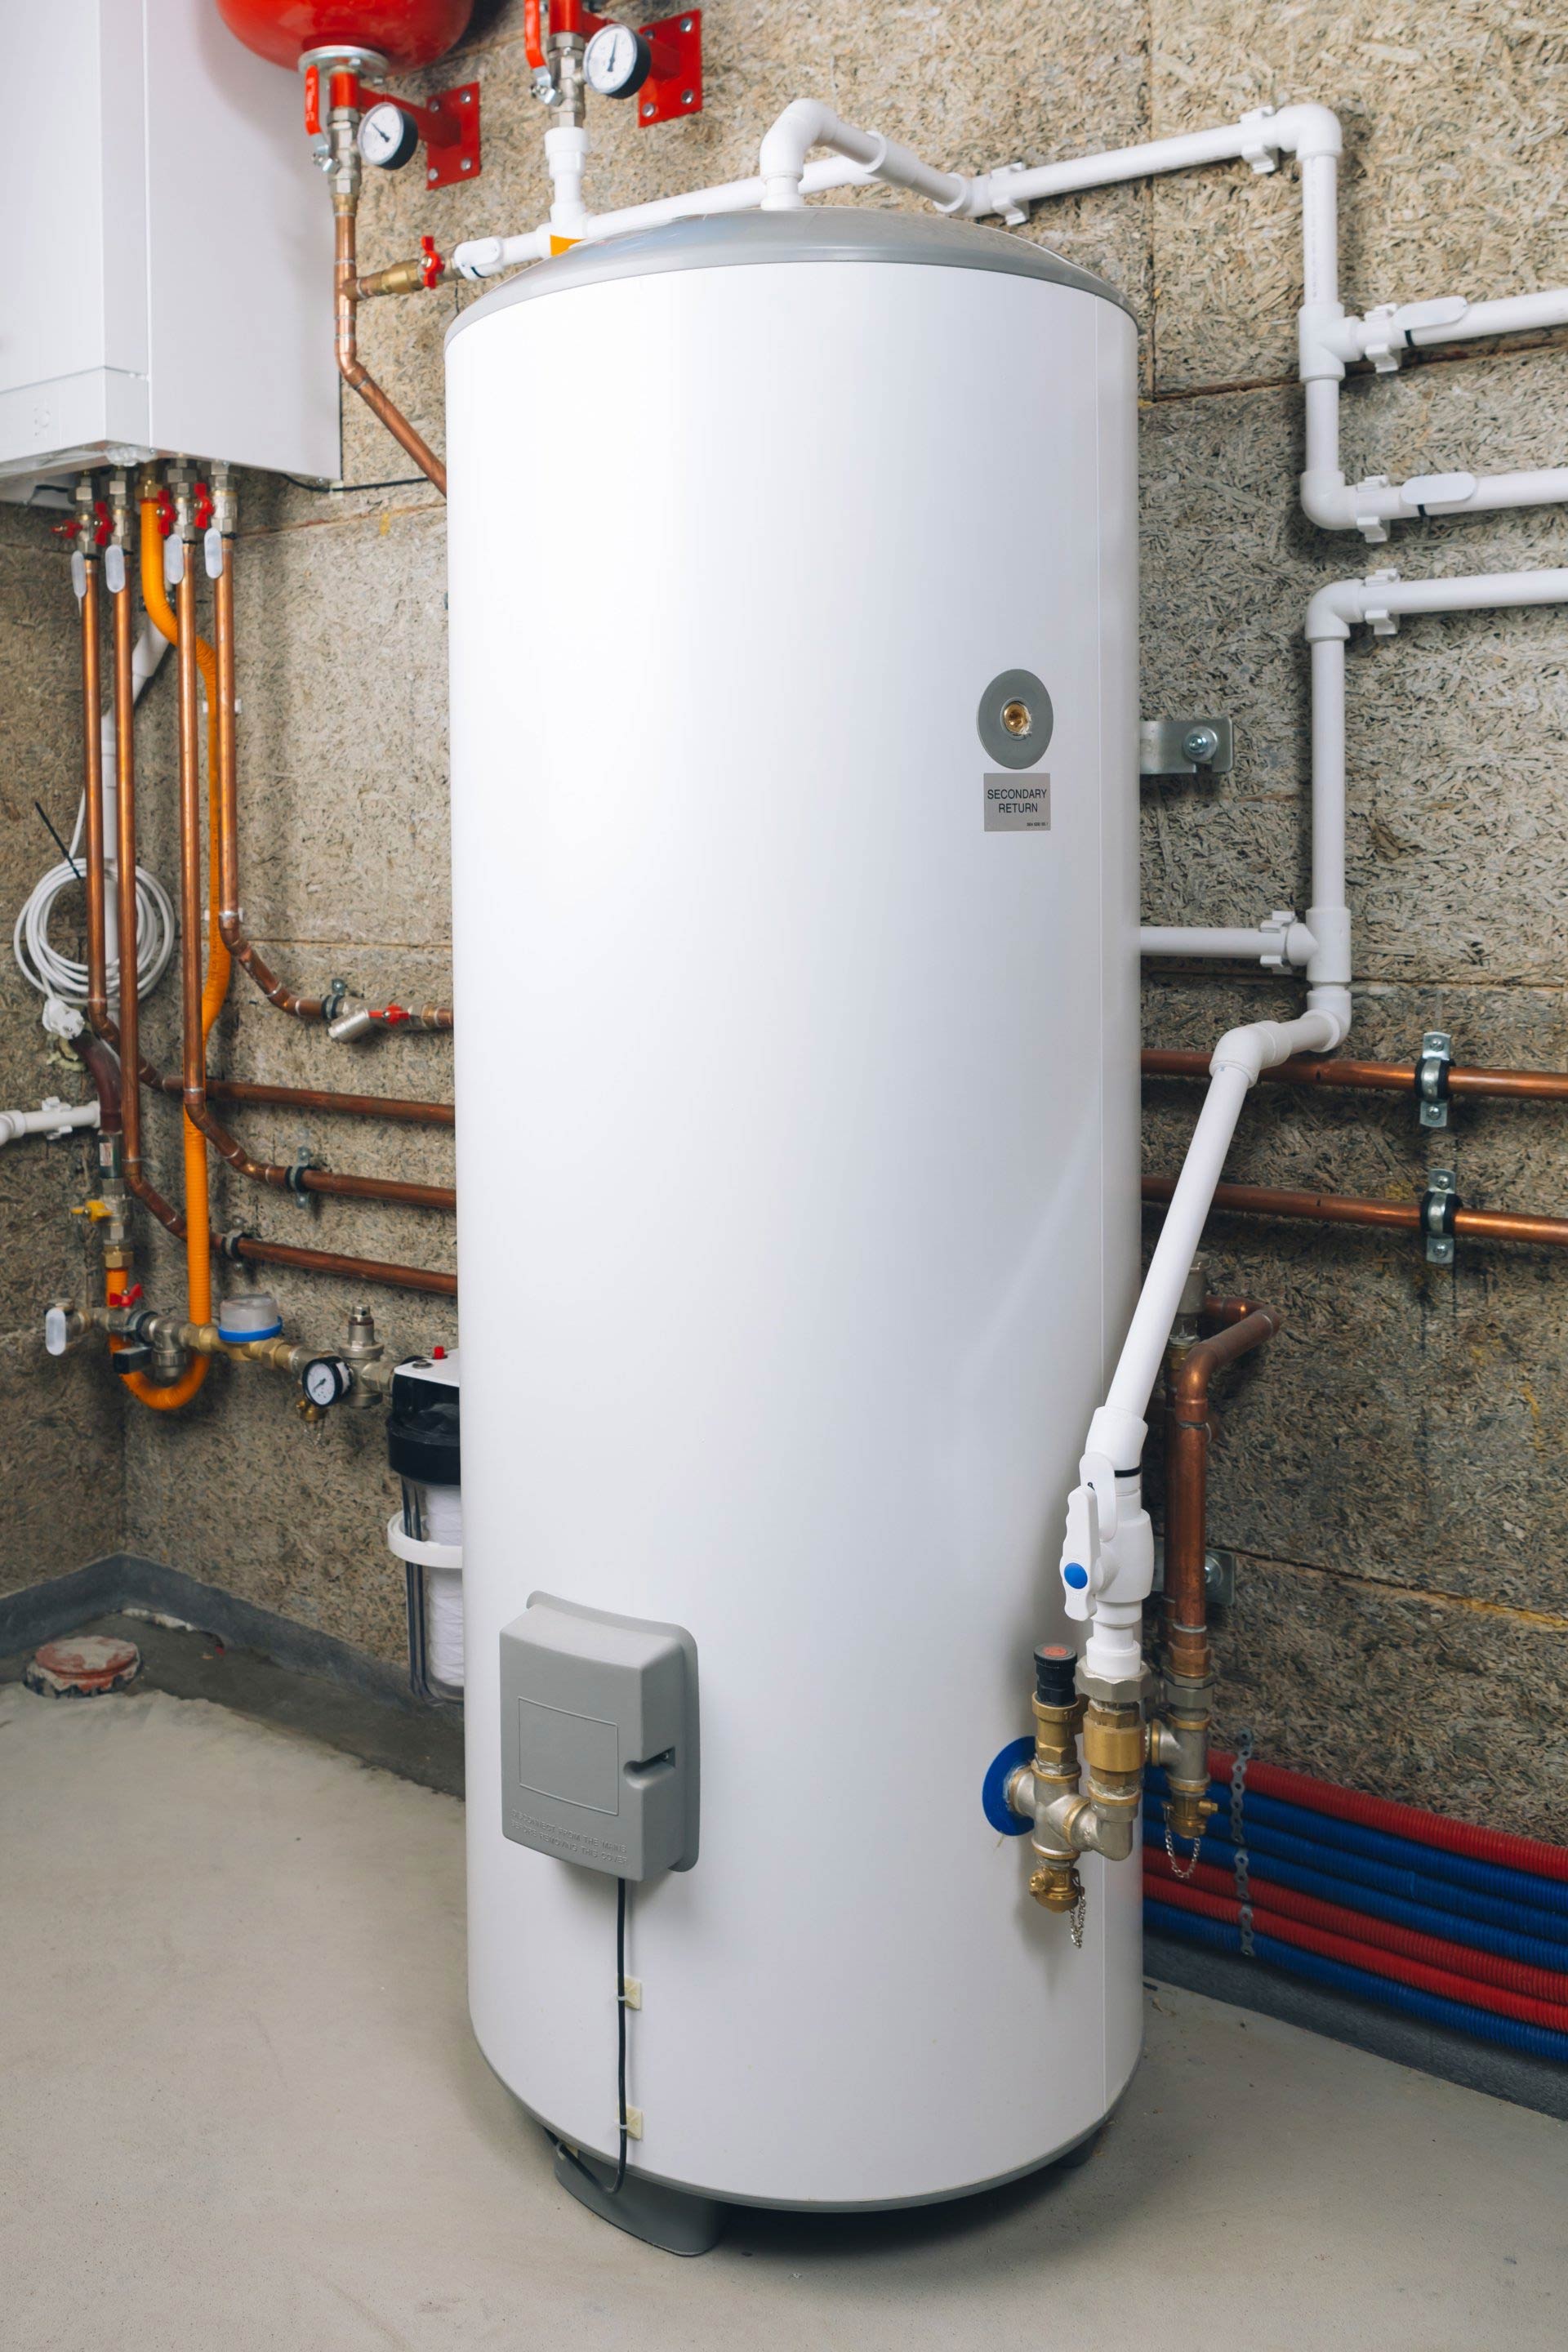 20 Common Water Heater Problems